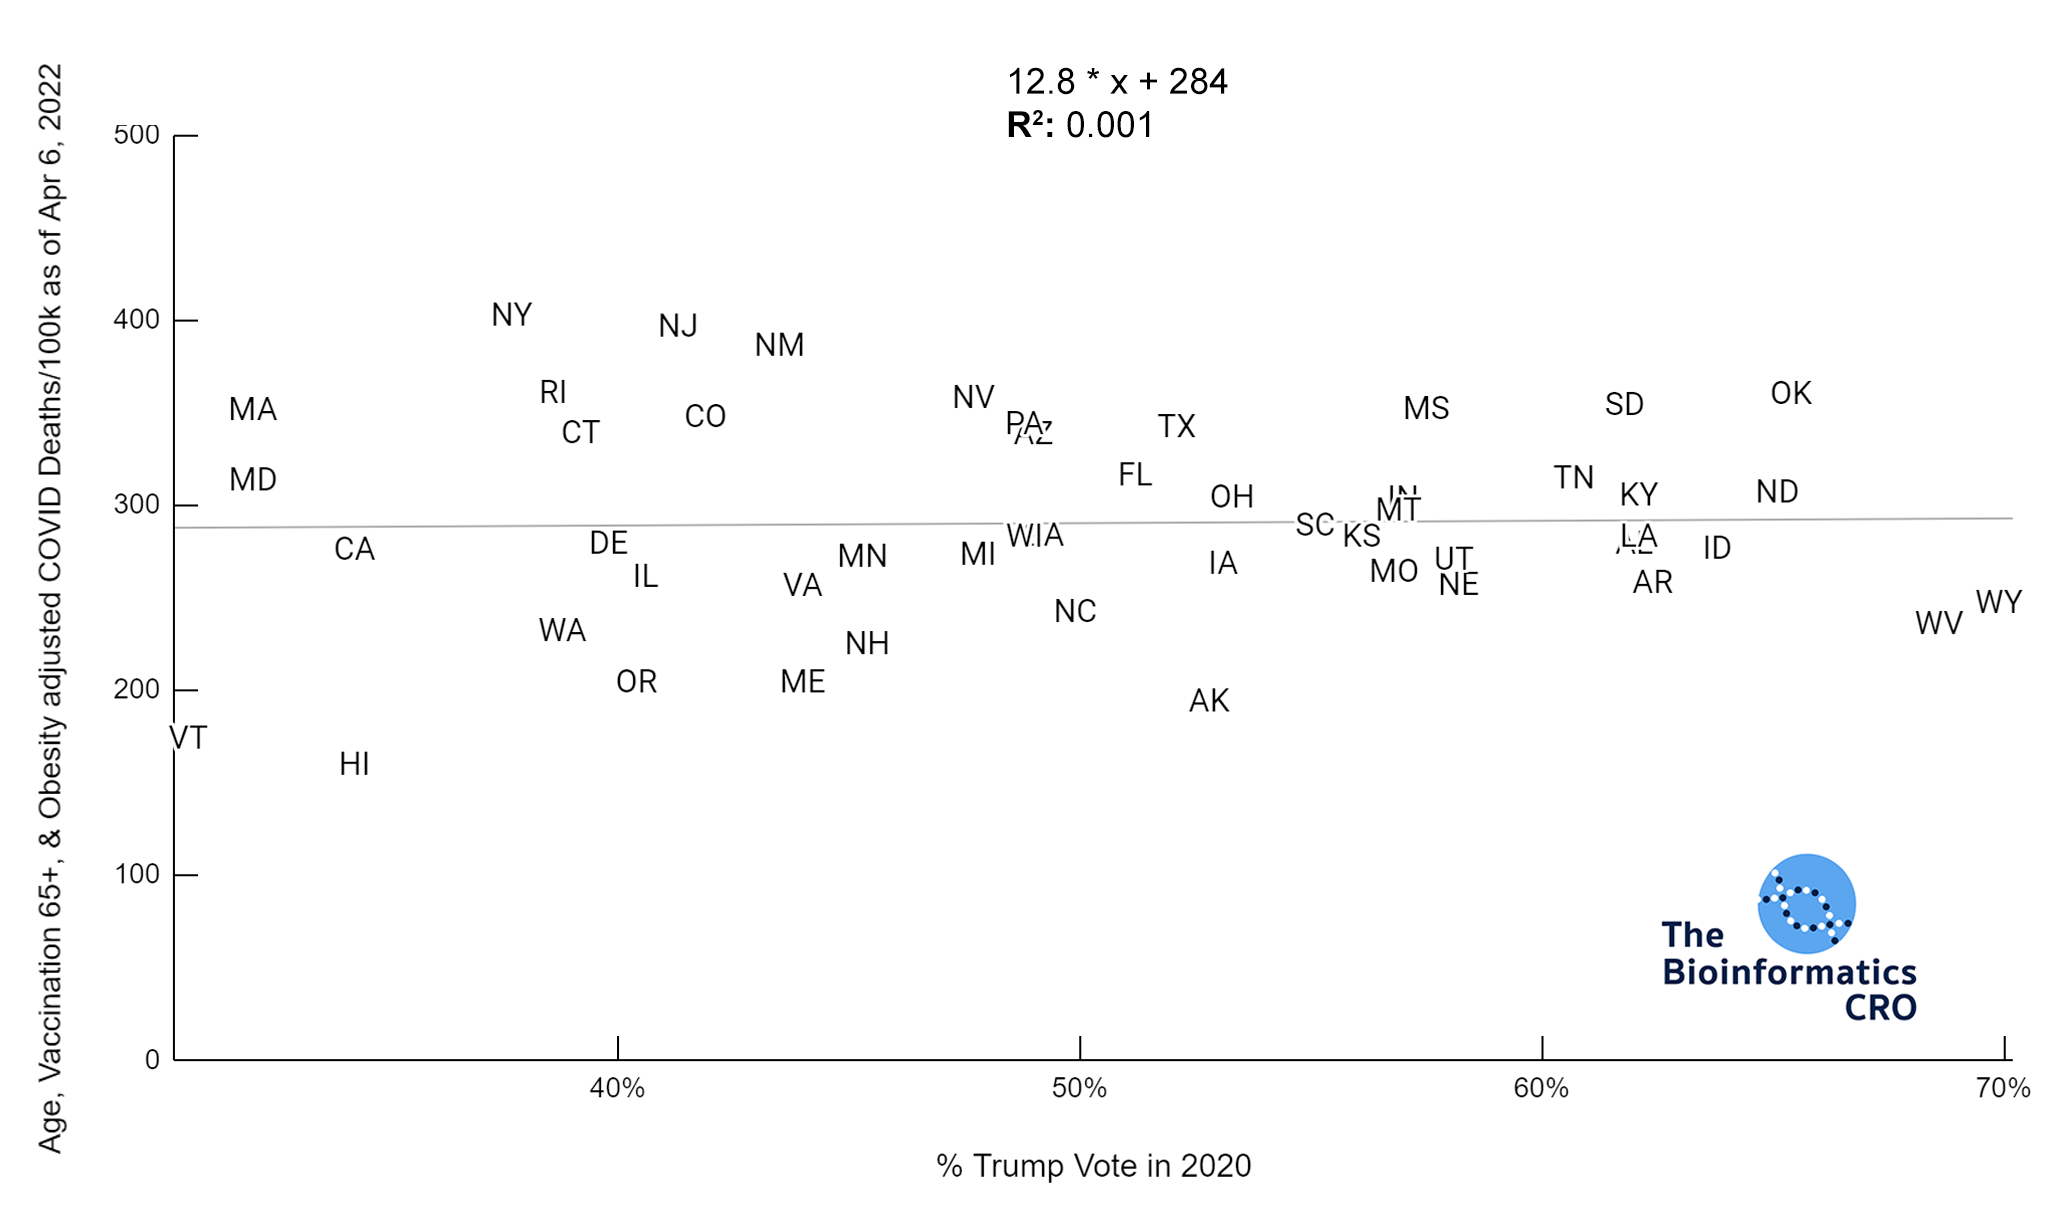 Age, Vaccinated Over 65 & Obesity adjusted COVID Deaths versus Percent Trump Vote in 2020 | y = 12.8 * x + 284 | R^2 = 0.001